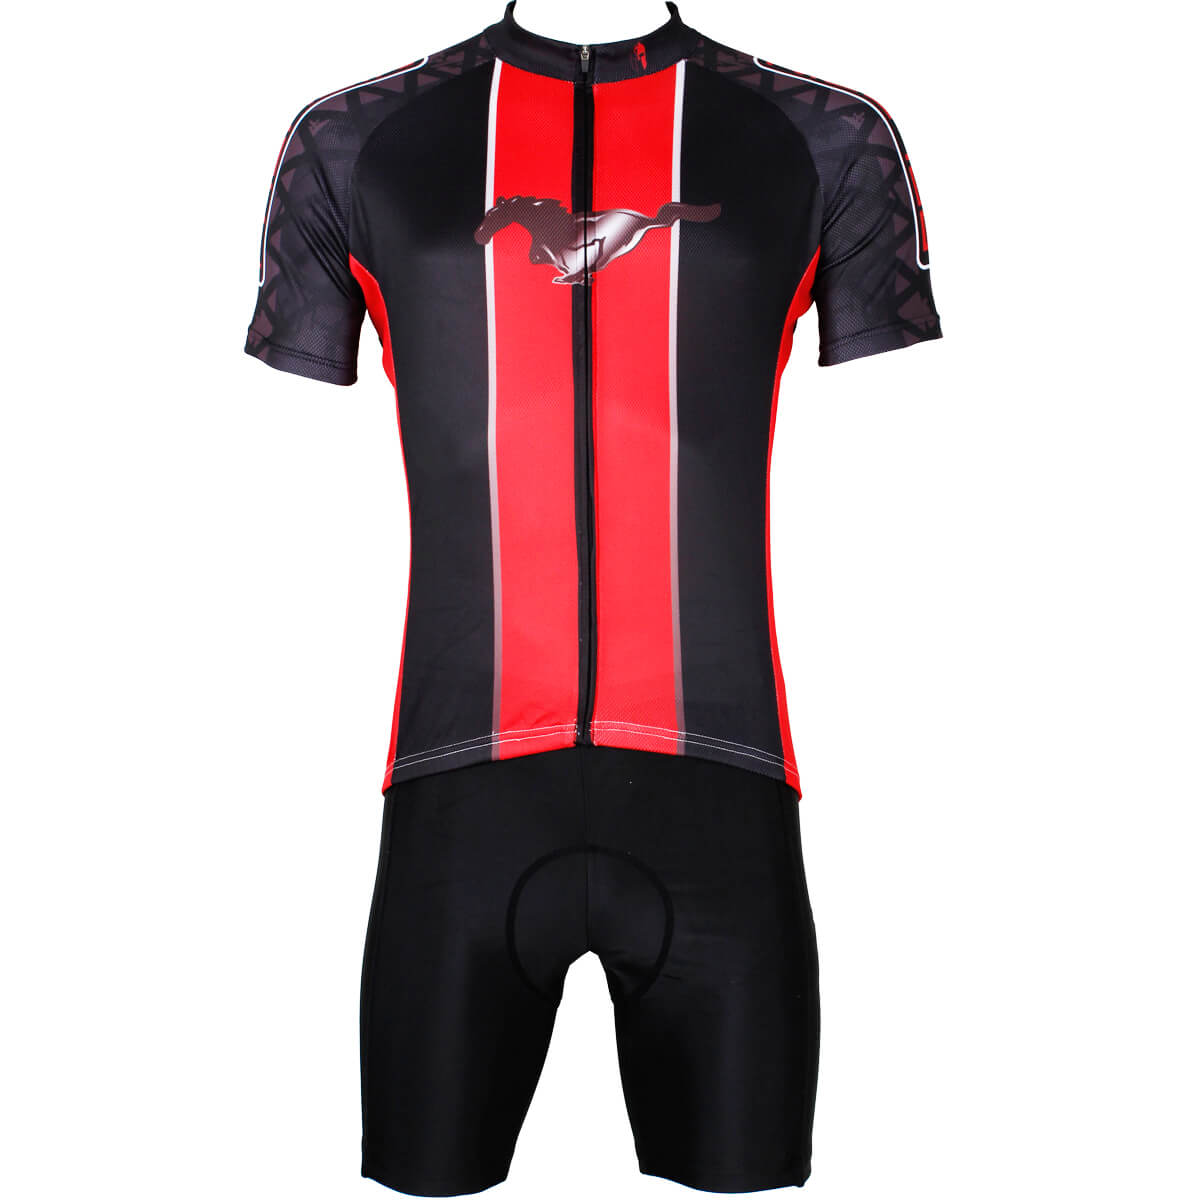 Wild Horse Design Cycling Suits With Jersey and shorts | Chogory